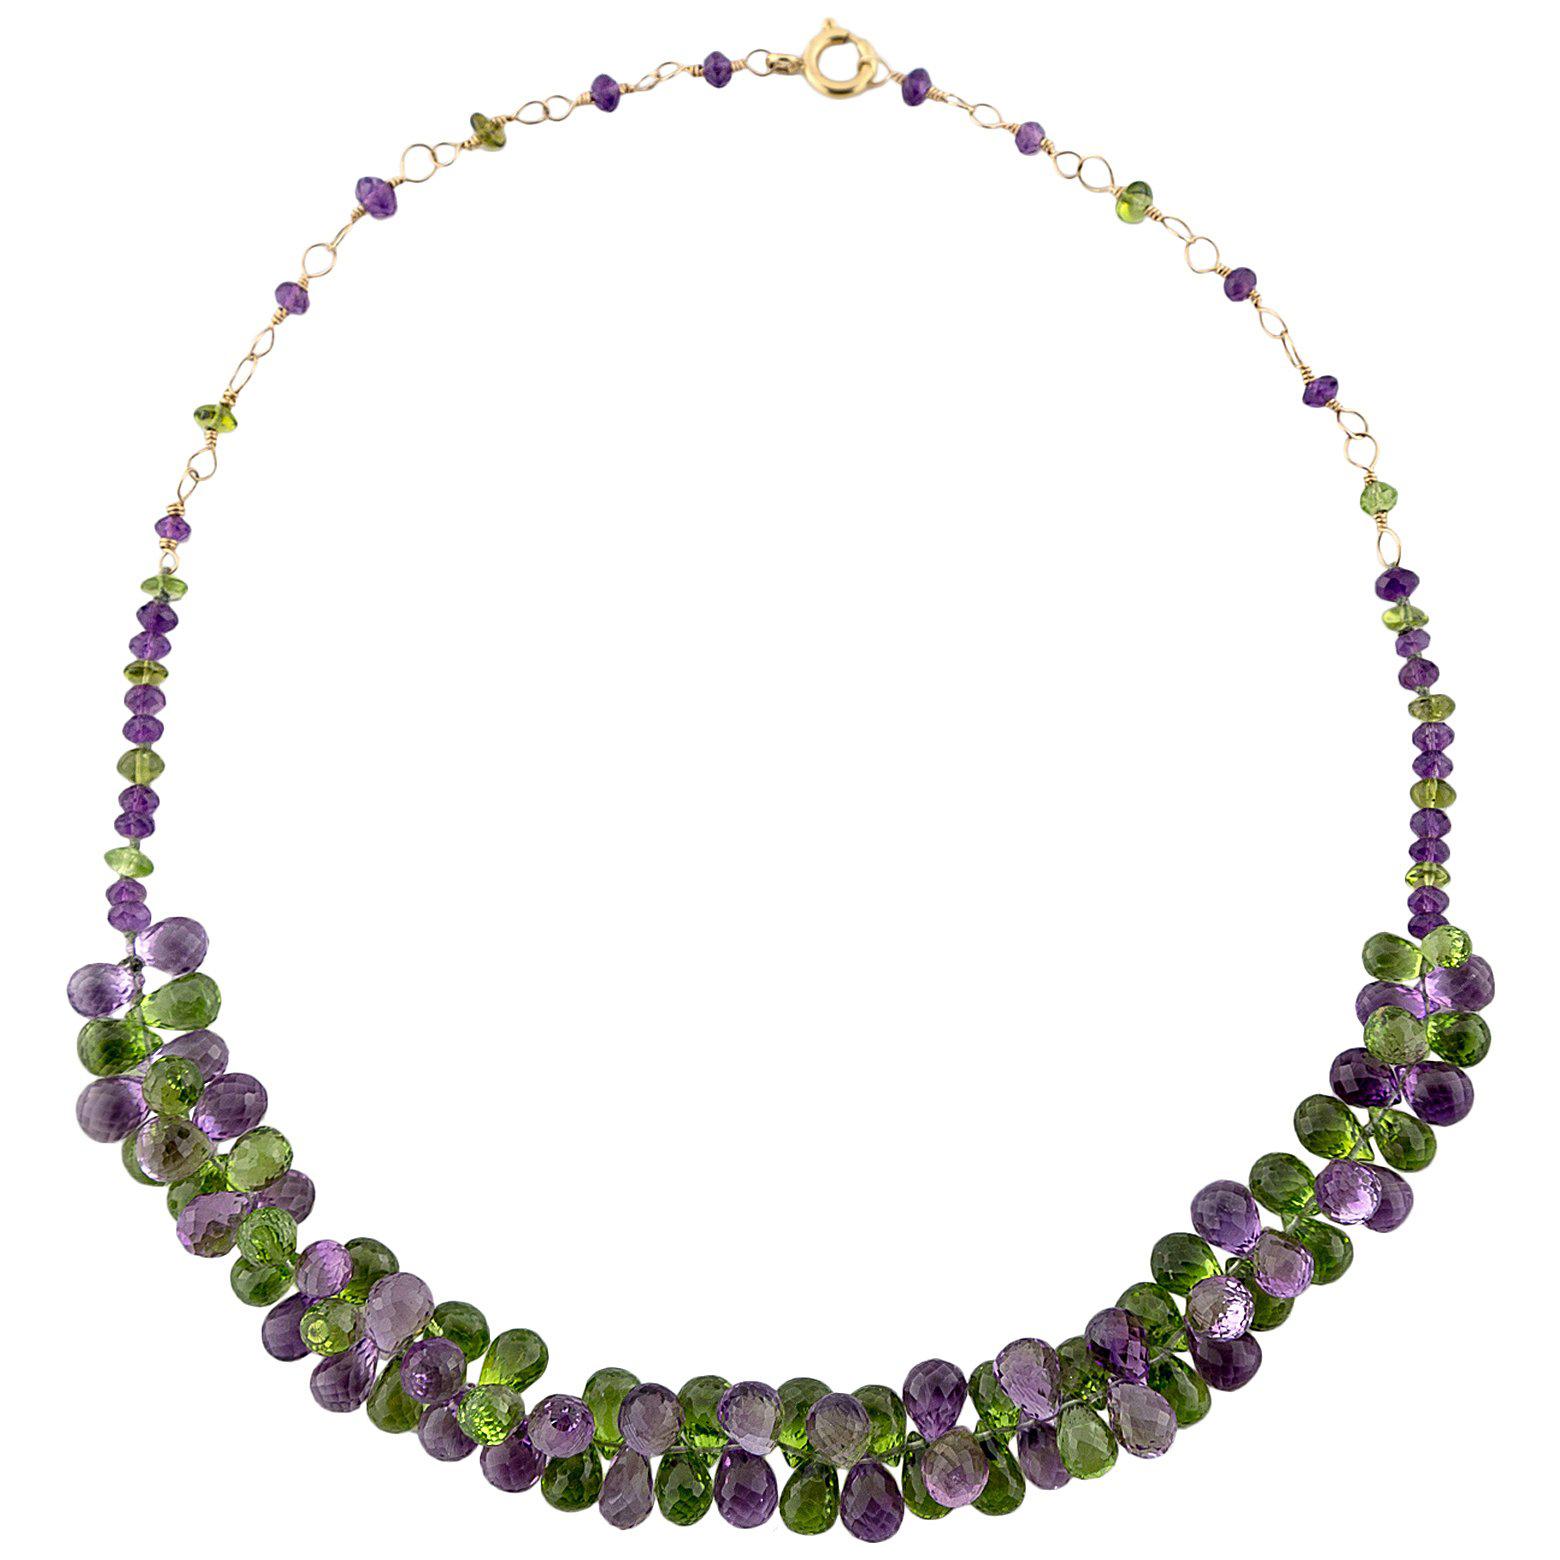 Yellow Gold Filled Necklace with Briolette Amethysts and Briolette Peridots For Sale